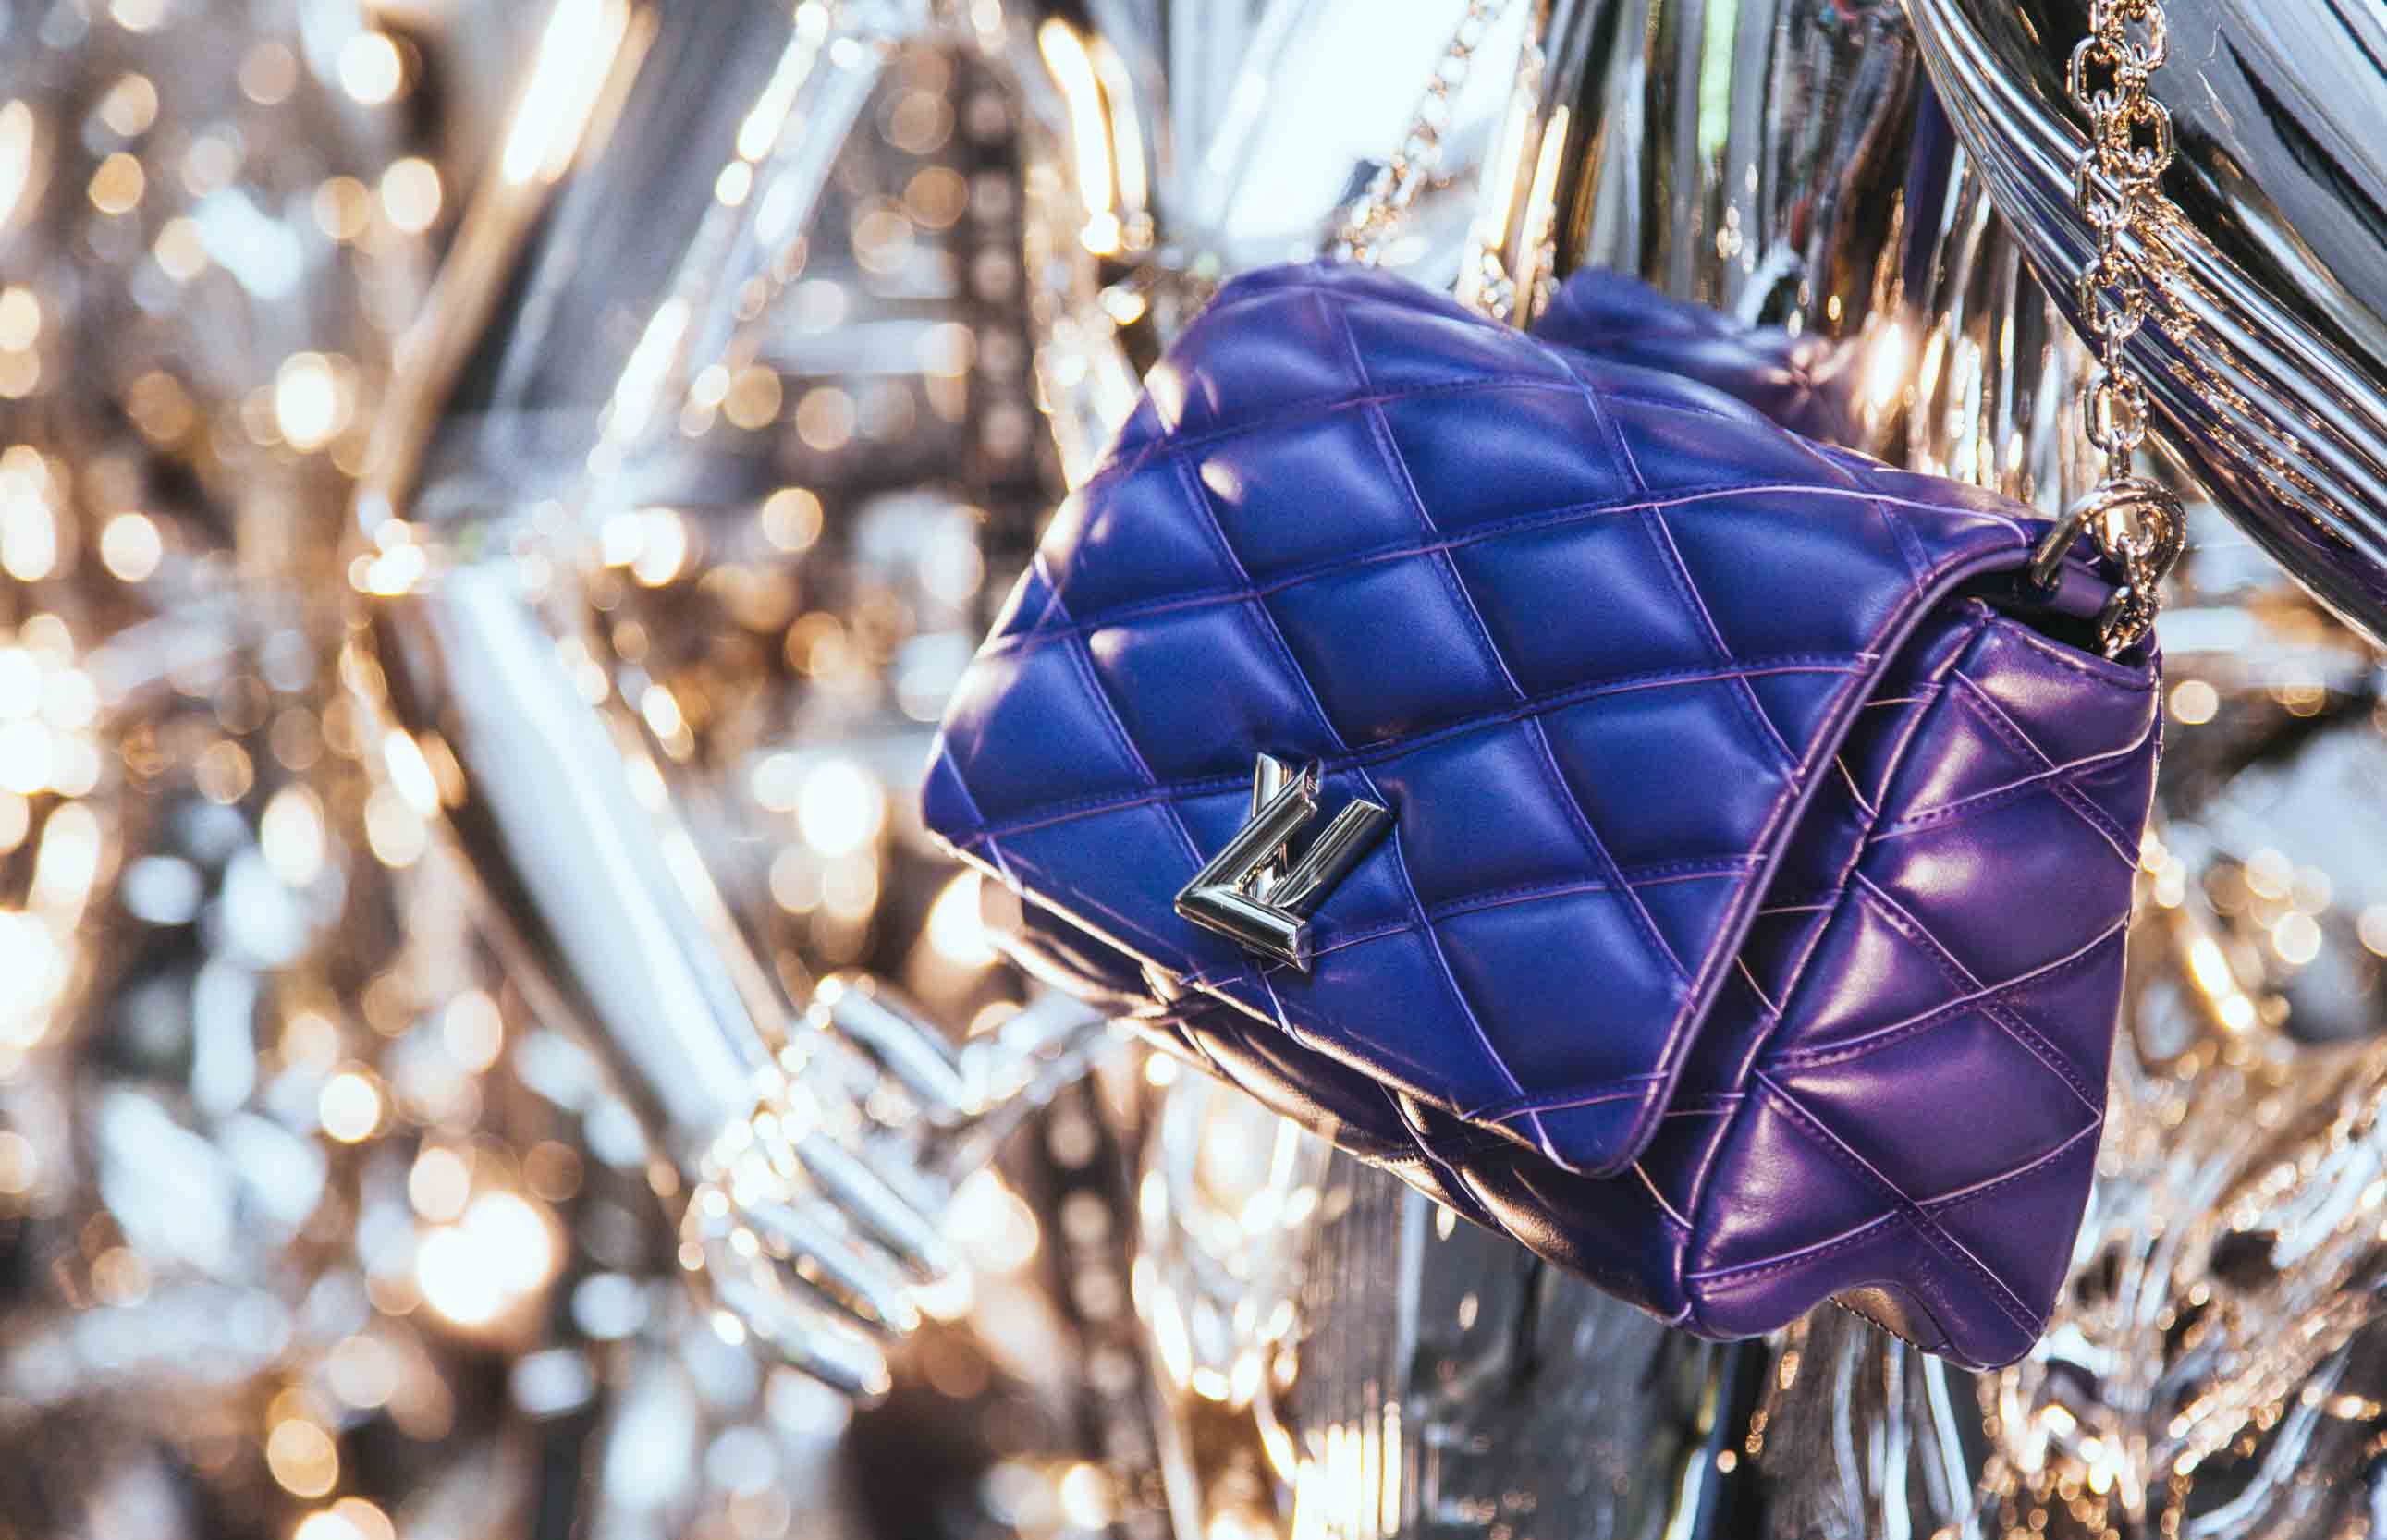 Louis Vuitton Introduces New Colorways of the Go-14 Bag